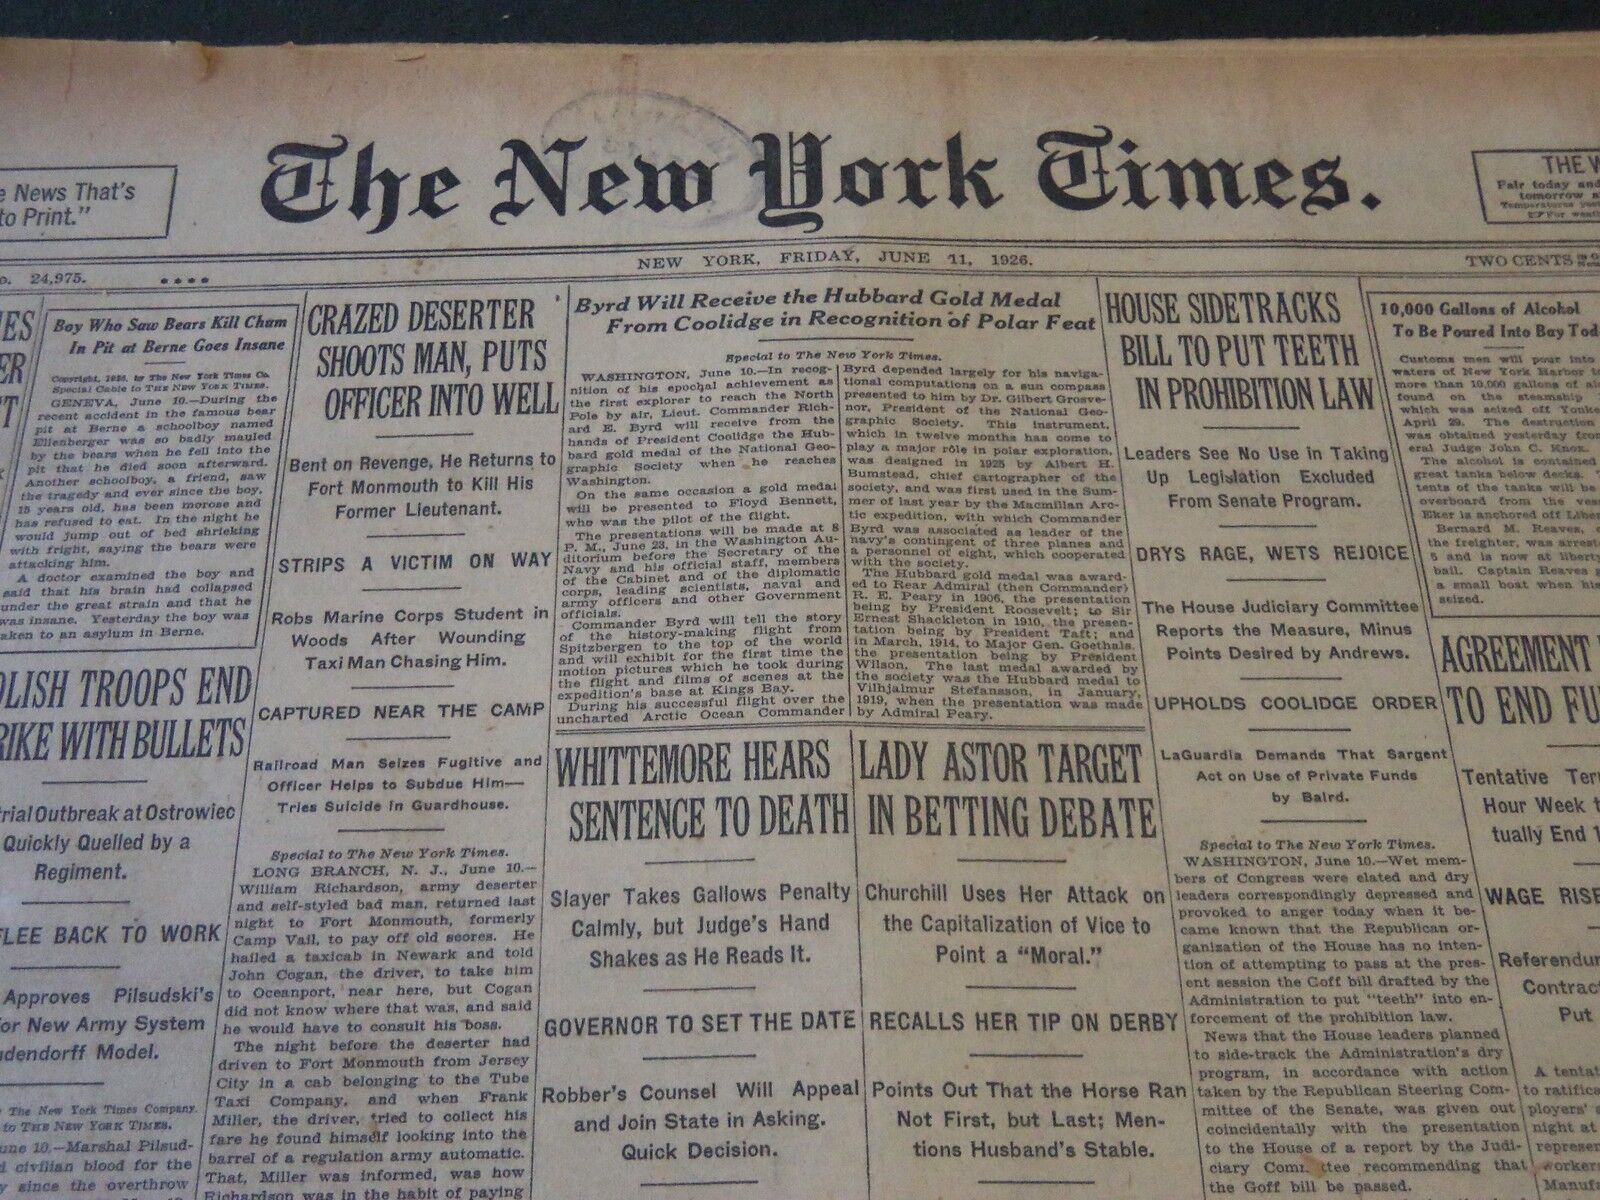 1926 JUNE 11 NEW YORK TIMES - BYRD WILL RECEIVE HUBBARD GOLD MEDAL - NT 5560